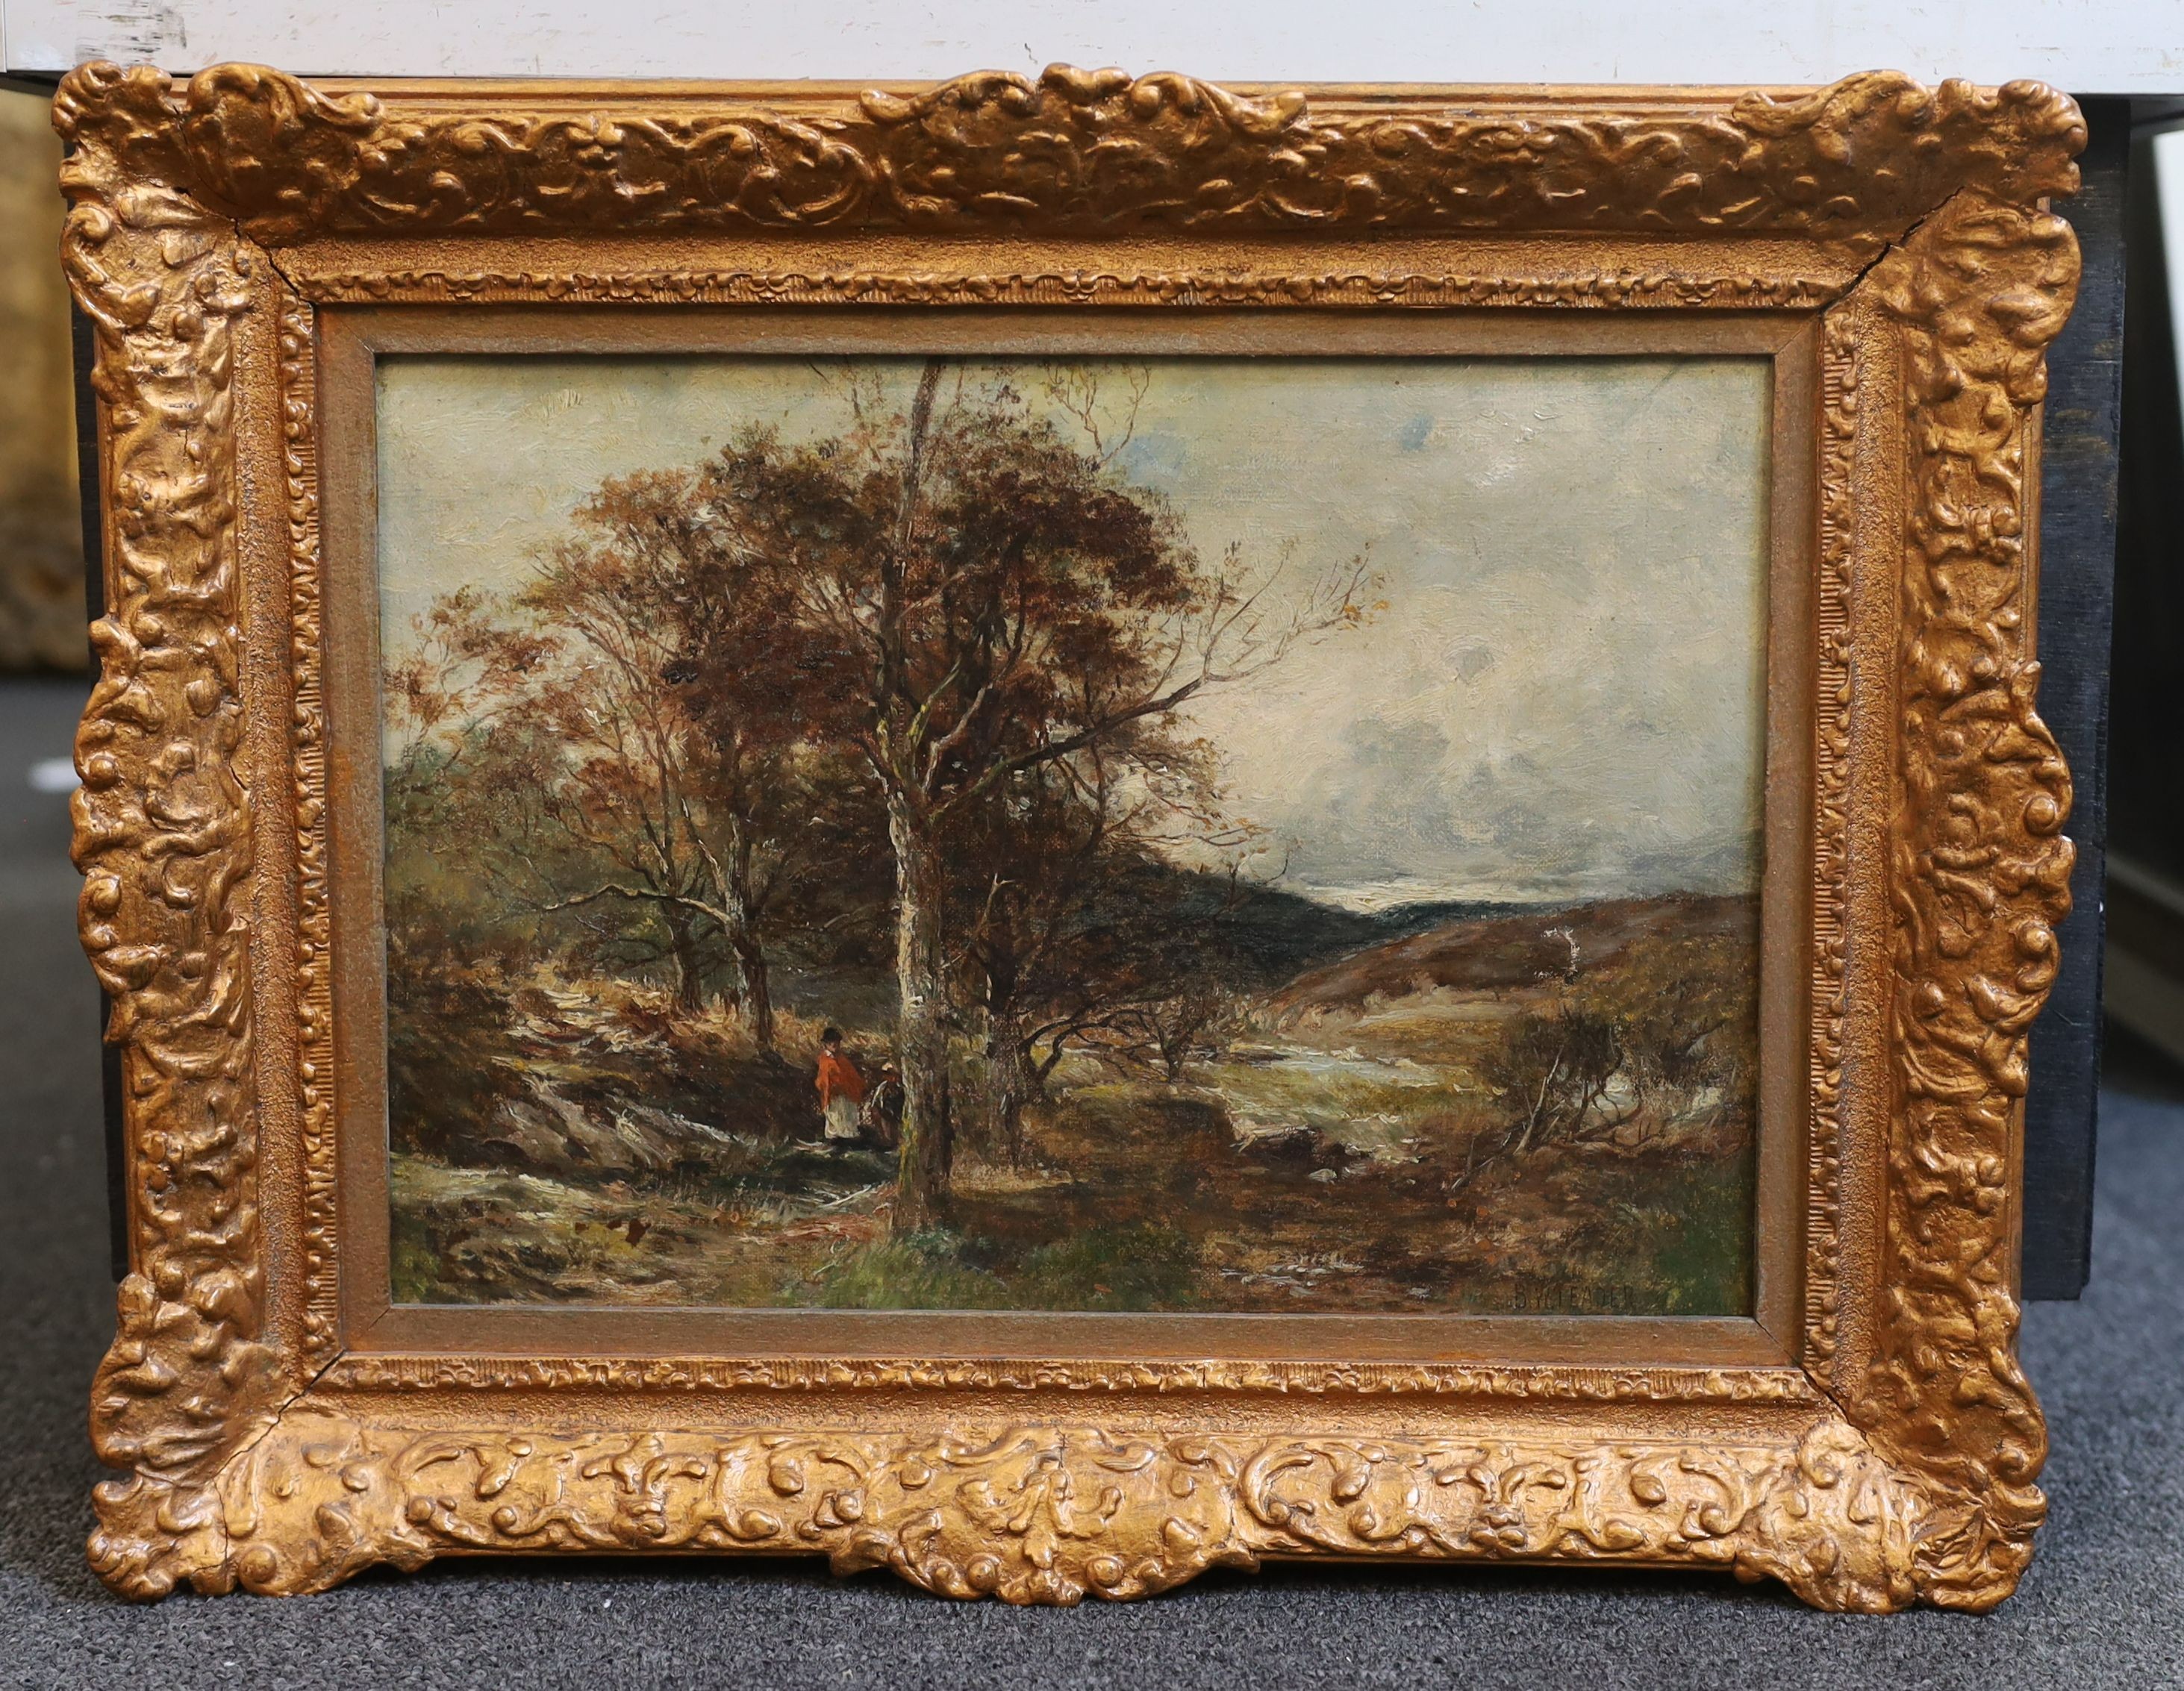 Benjamin Williams Leader (1831–1923), Travellers in a stormy landscape, oil on canvas, 24 x 34cm